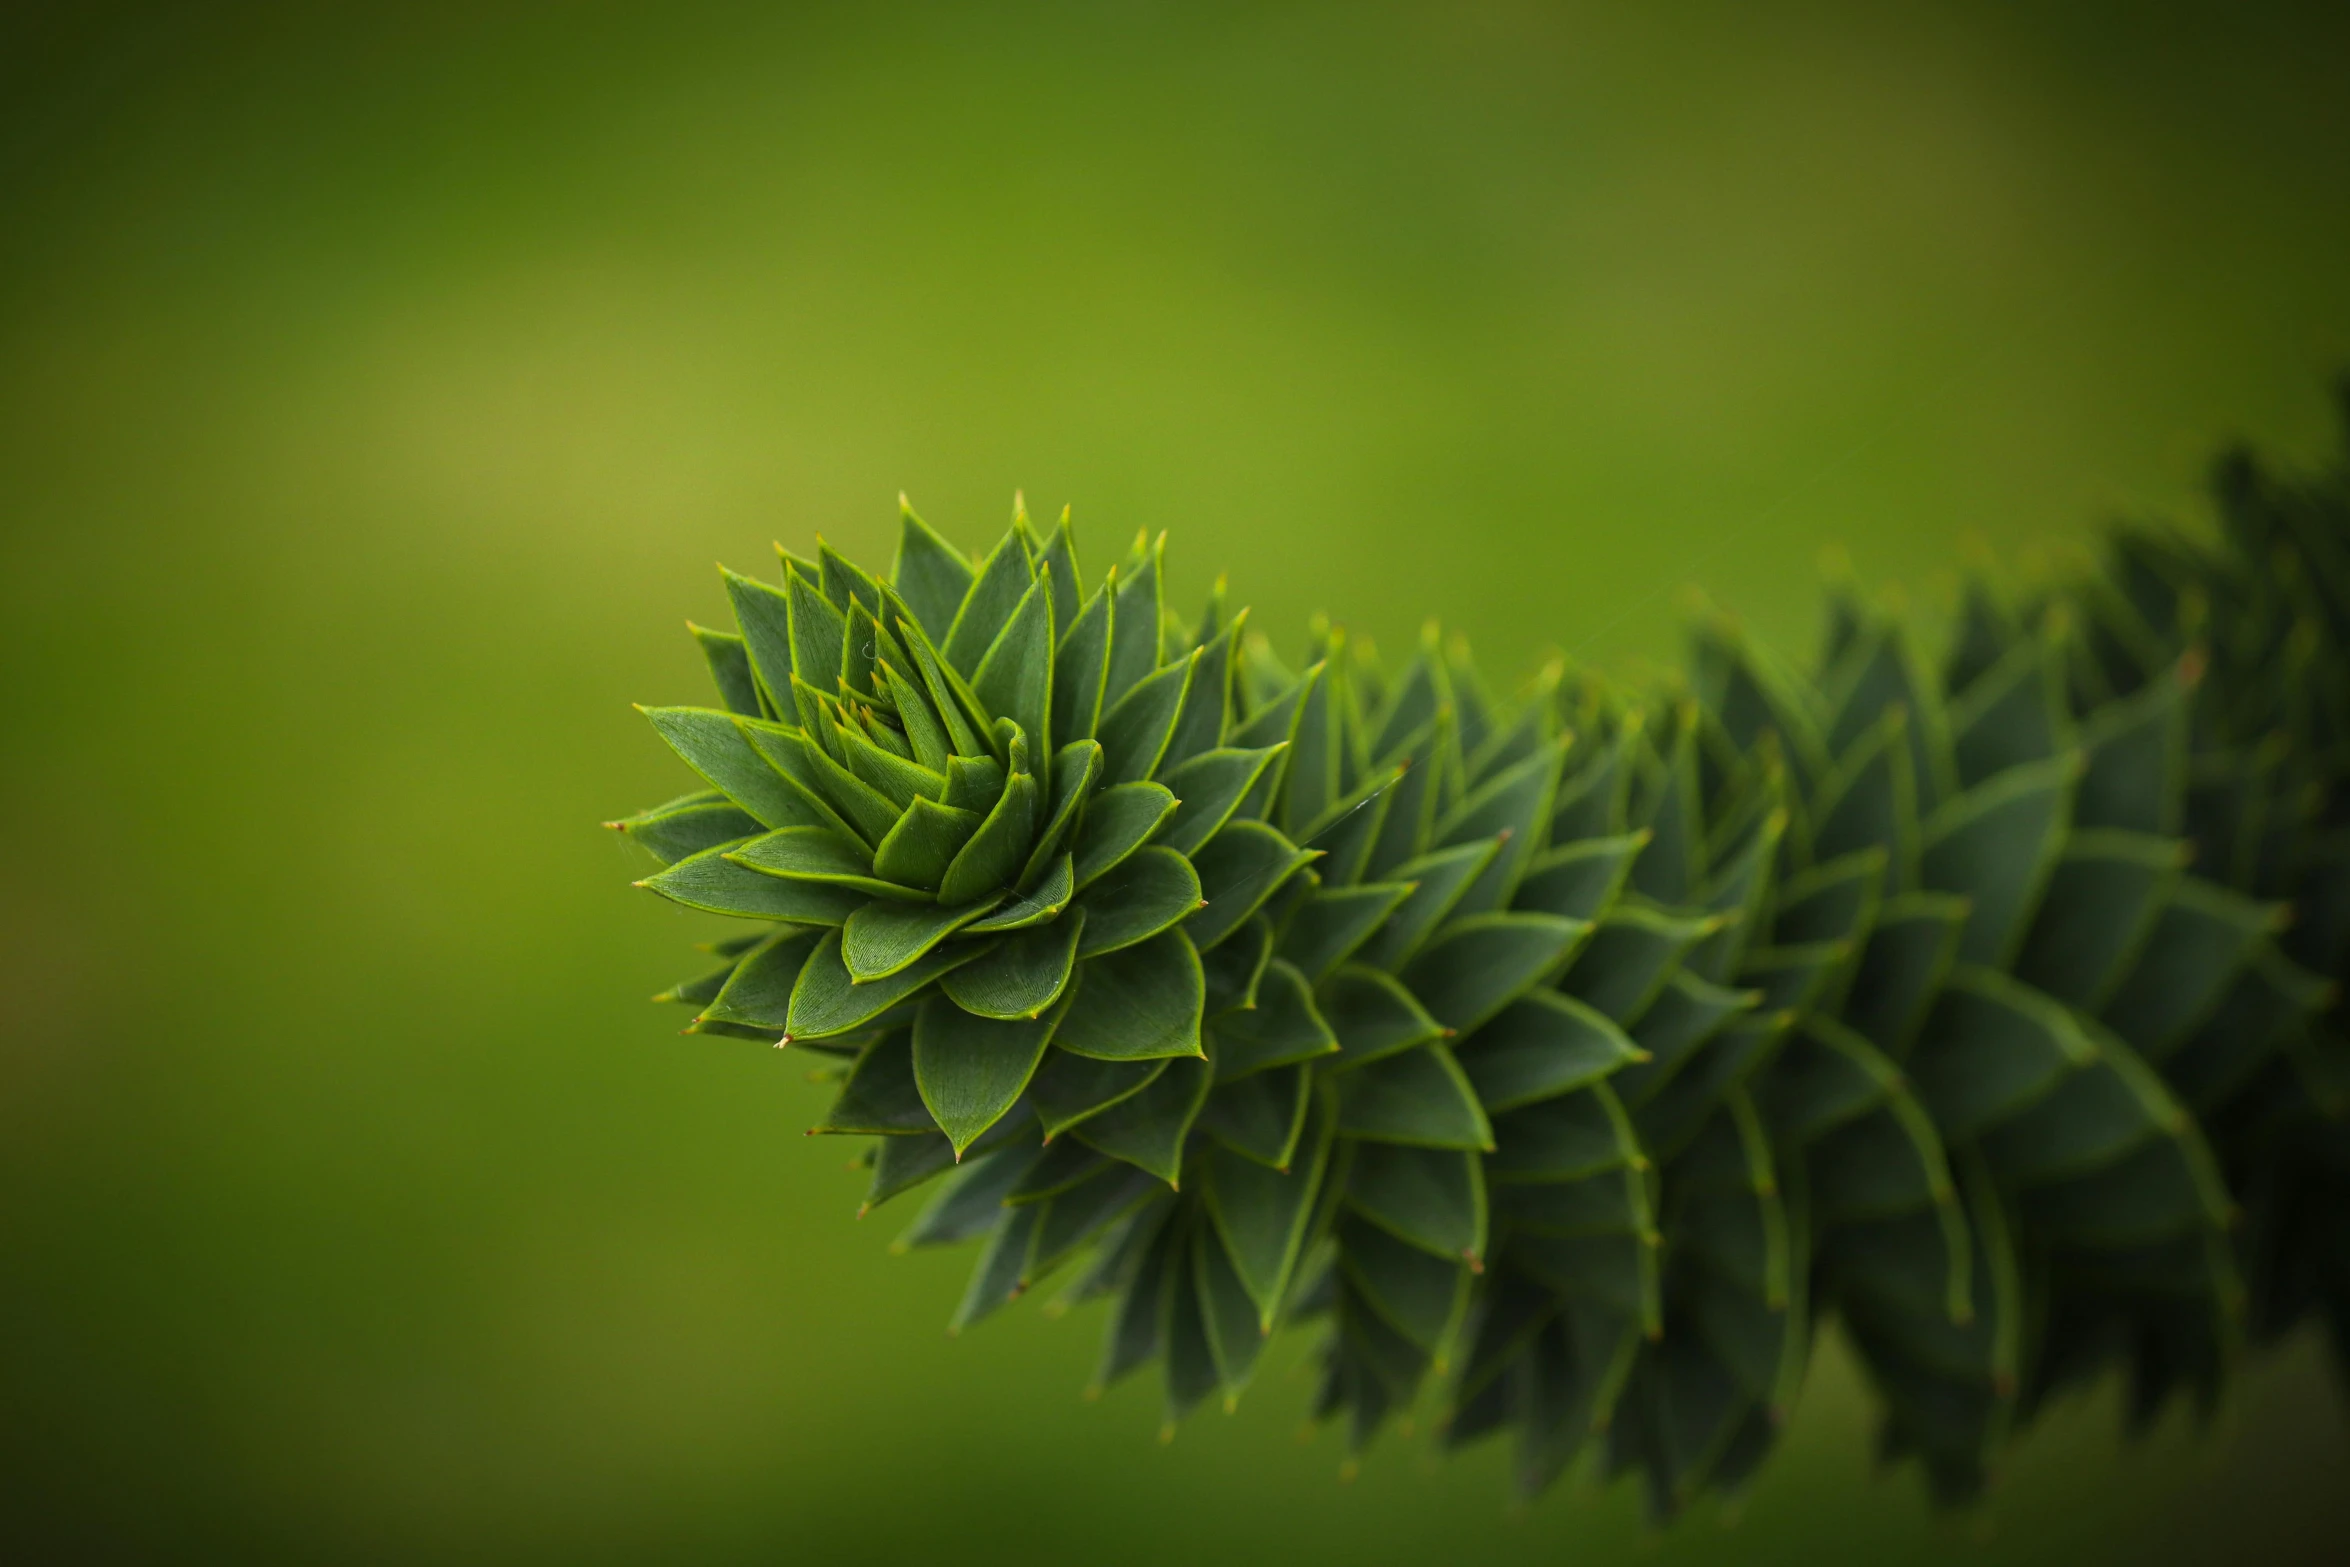 a close up of a green plant with a blurry background, a macro photograph, unsplash, hurufiyya, black fir, fractal, serrated point, depth of field ”